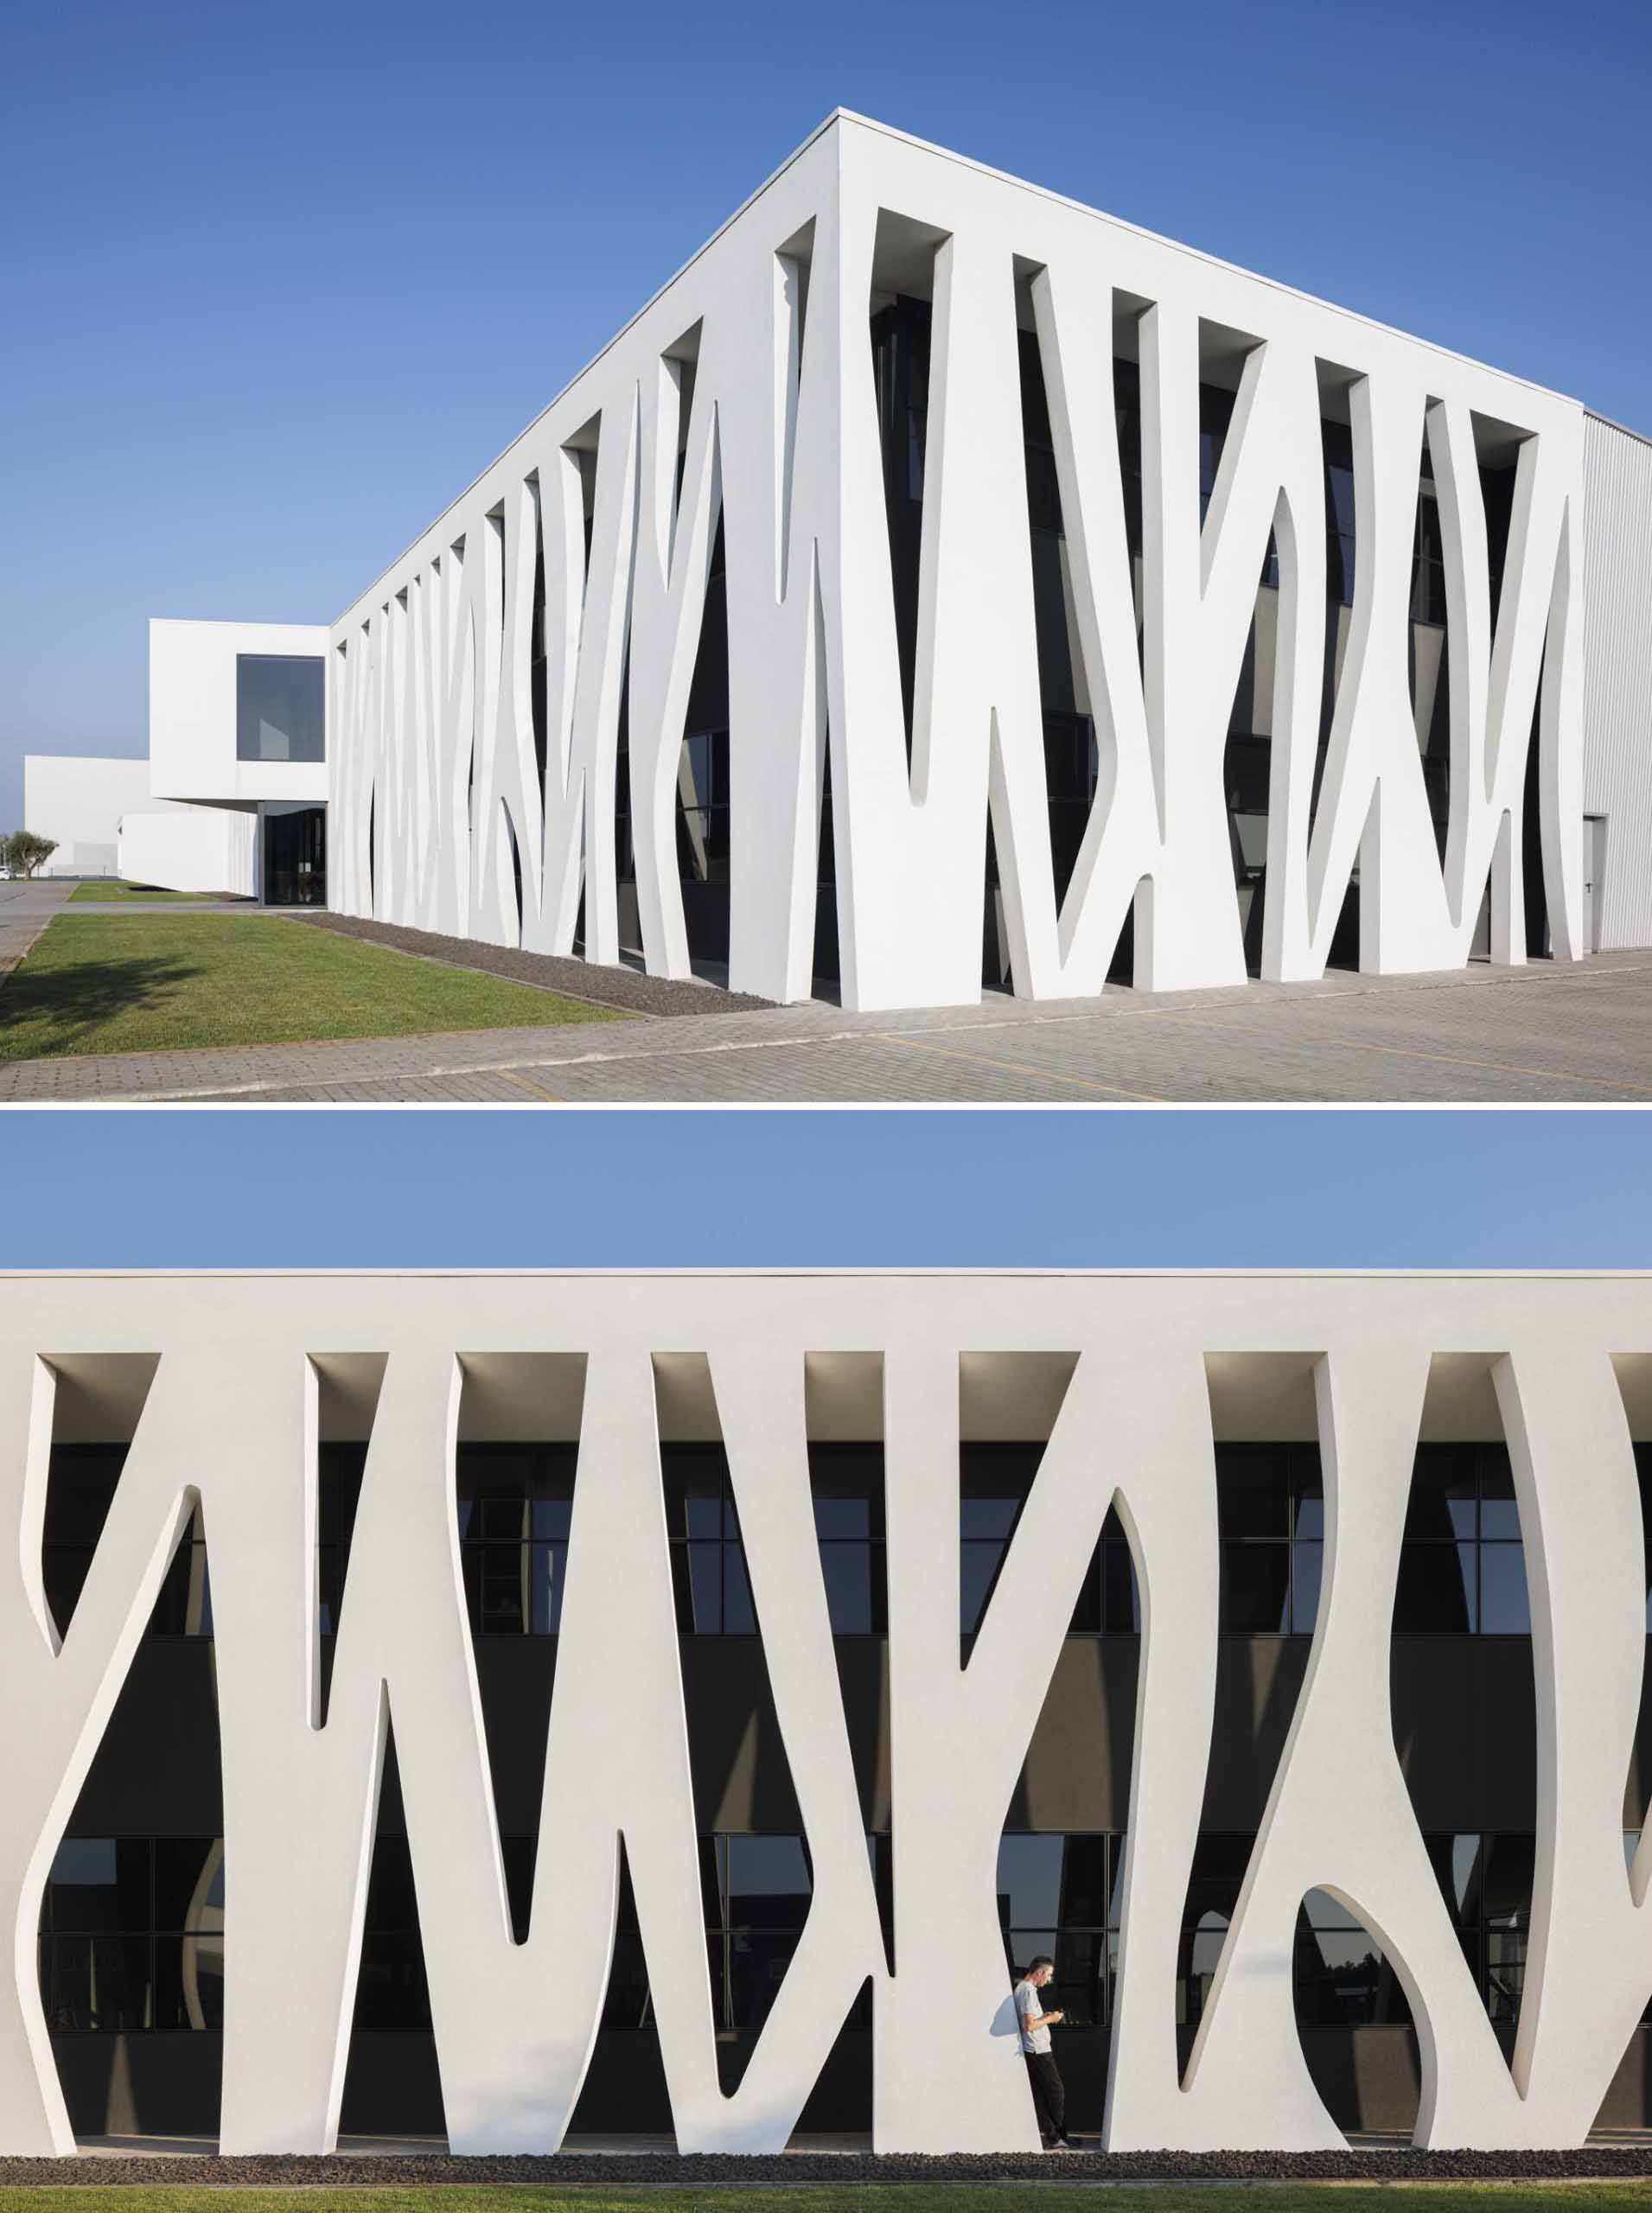 An artistic facade inspired by the structure found in baking dough.